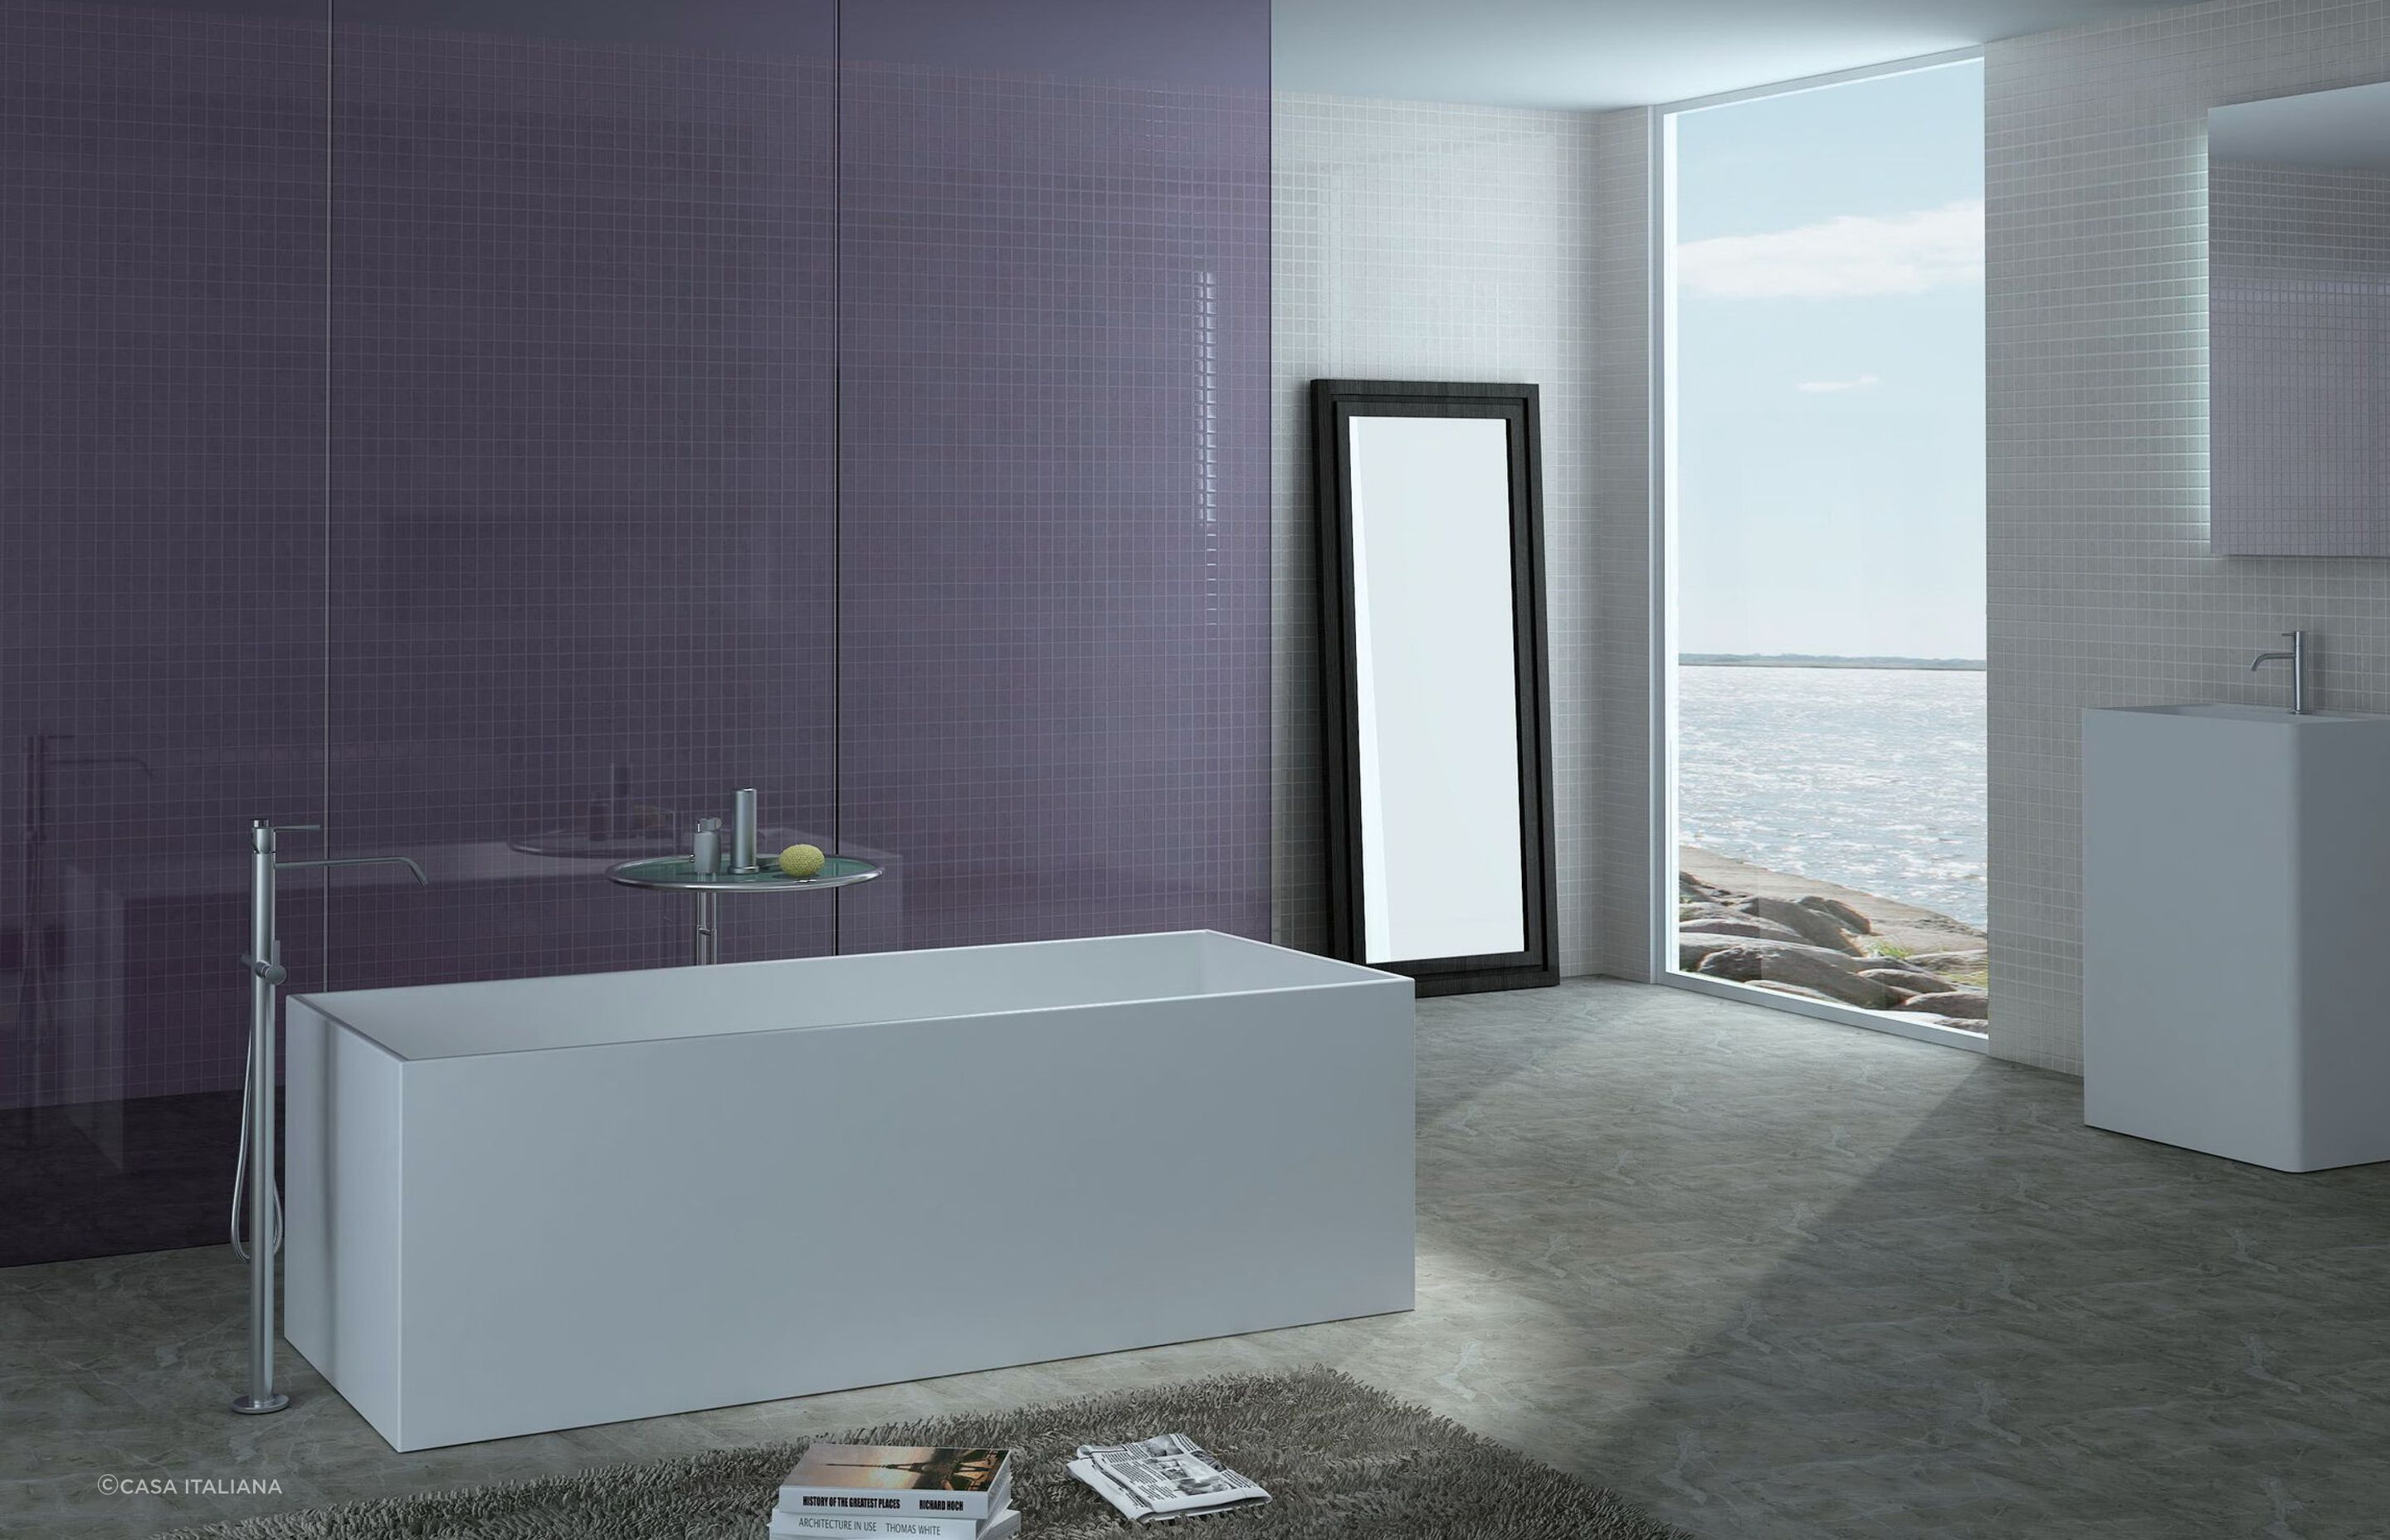 Options like the Cube Composite Stone Bathtub bring a distinctive aesthetic quality that few can match